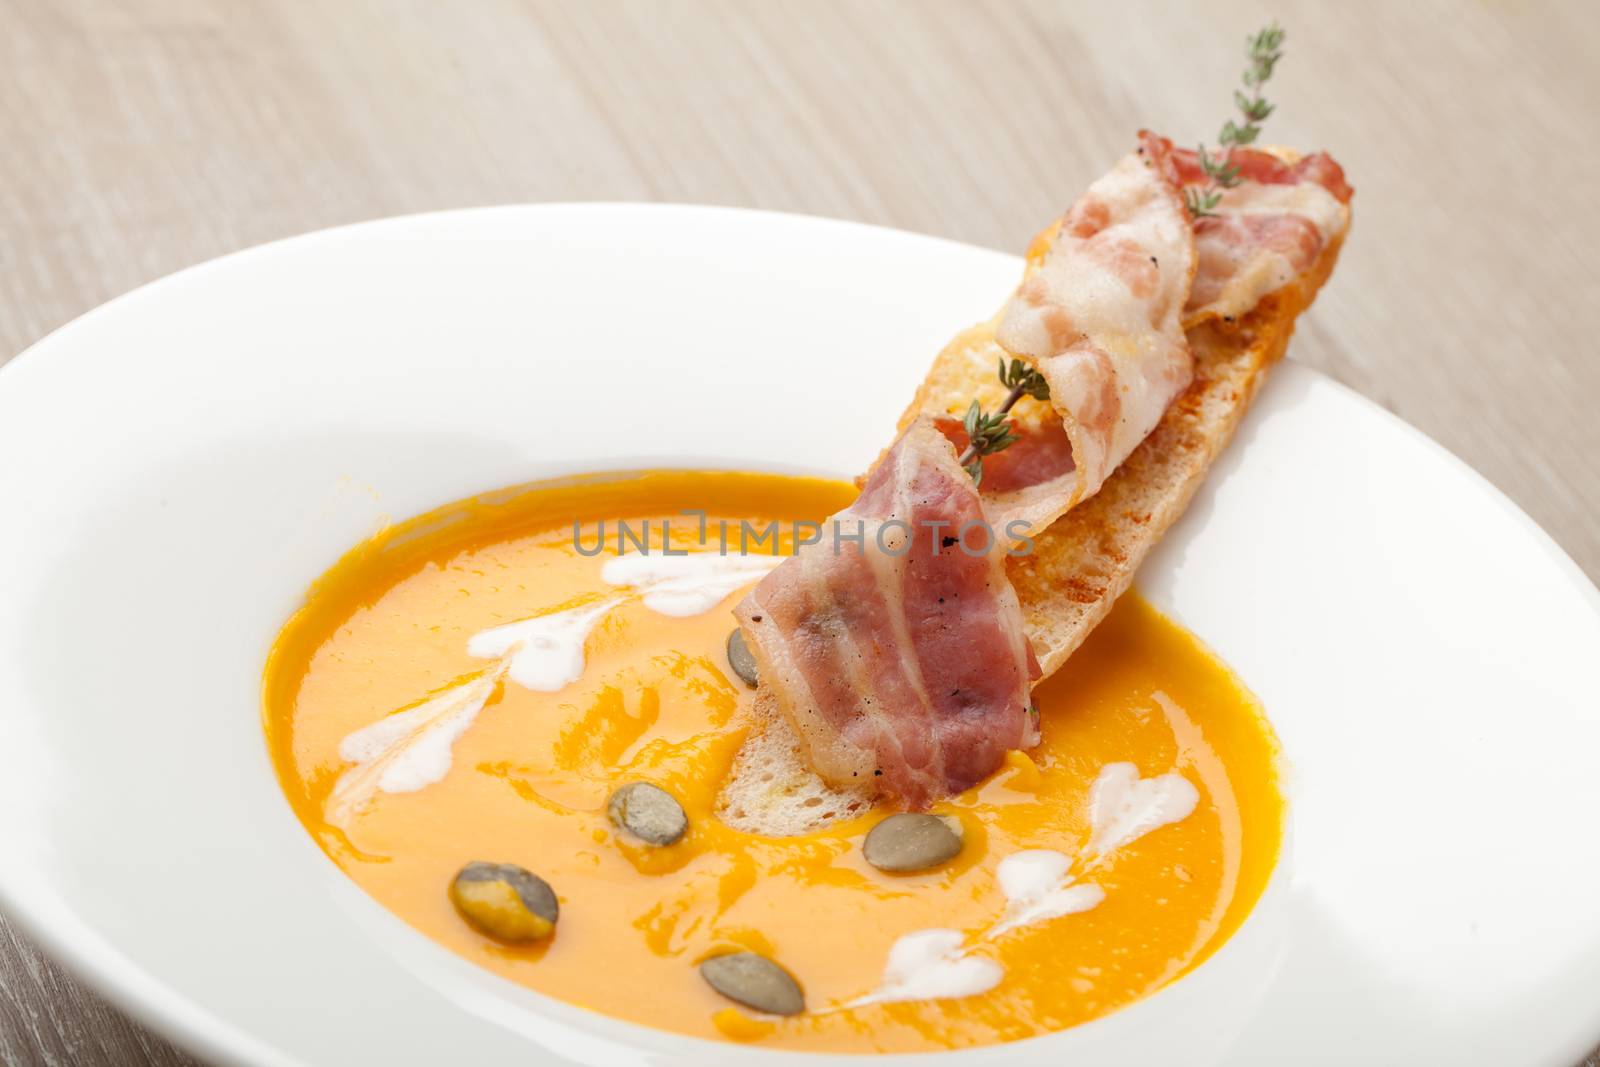 Pumpkin cream soup puree with bread slice, bacon and seeds by SergeyAK